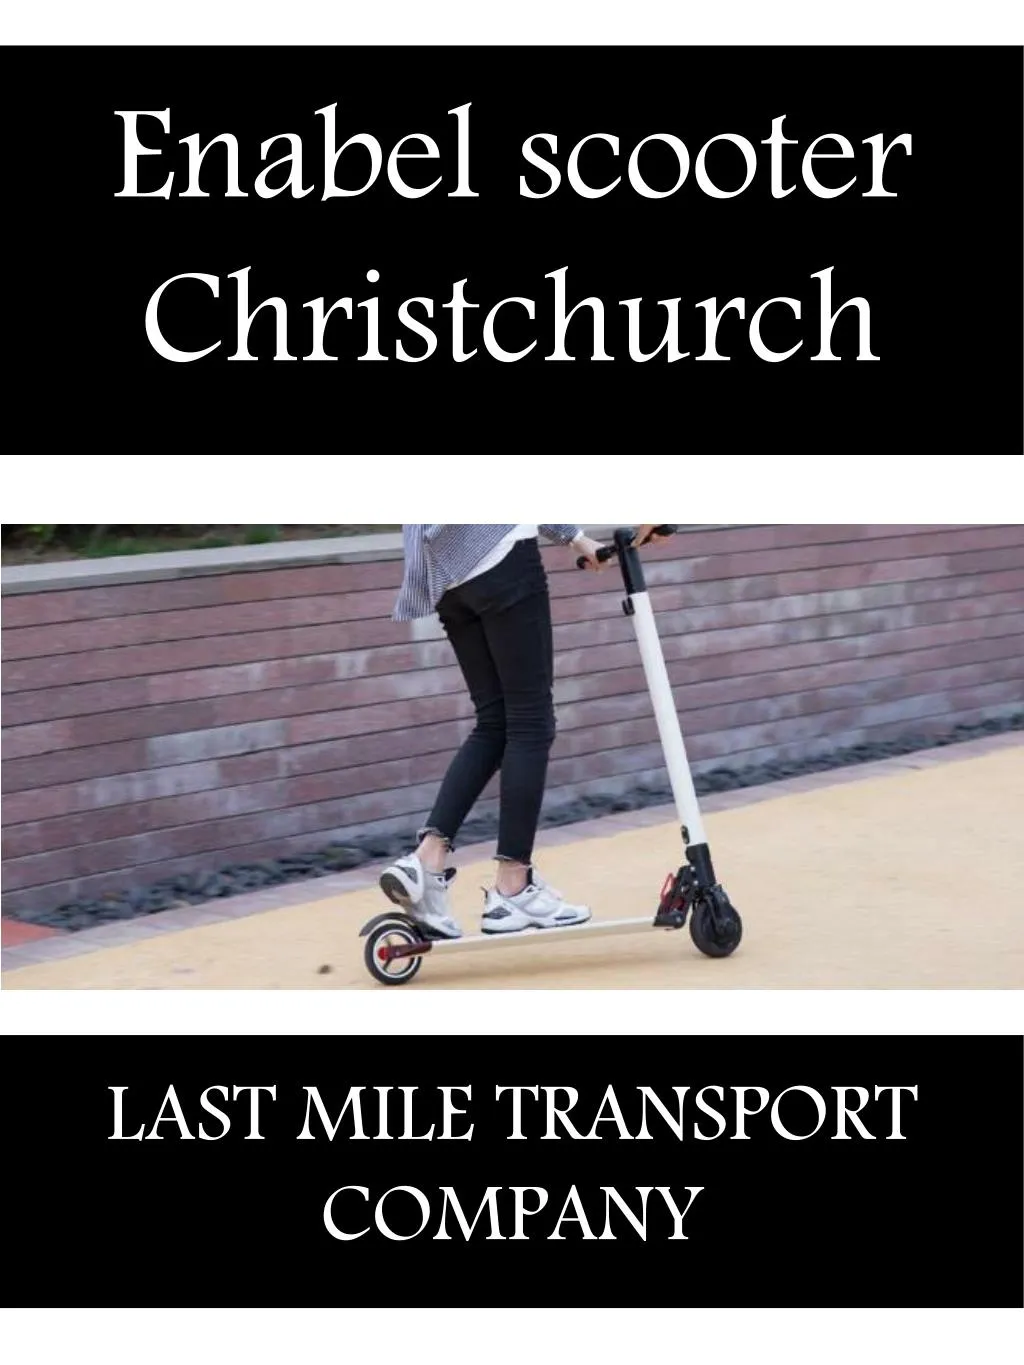 enabel scooter christchurch